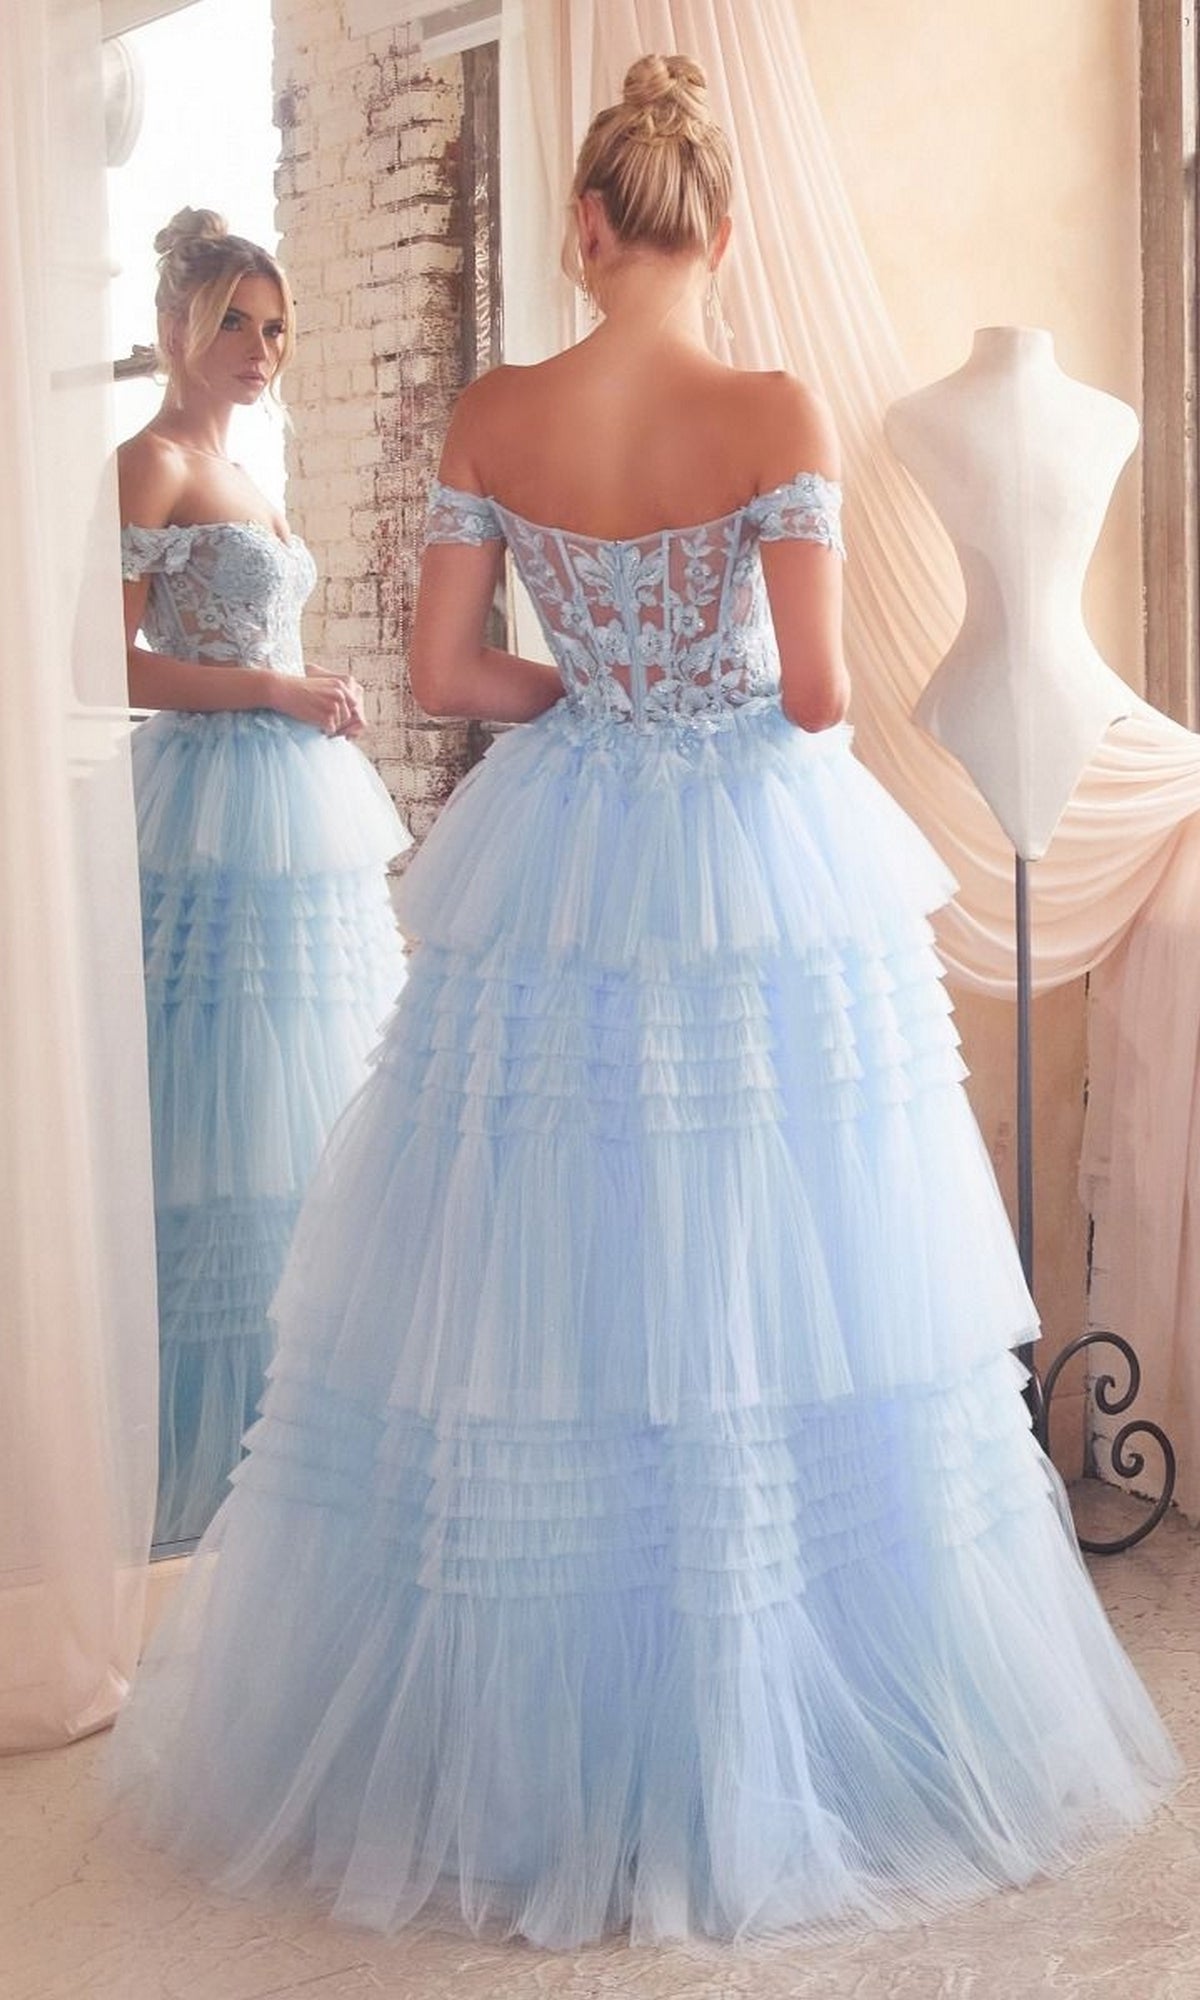 Lace-Bodice Long Ruffled Prom Ball Gown 9315